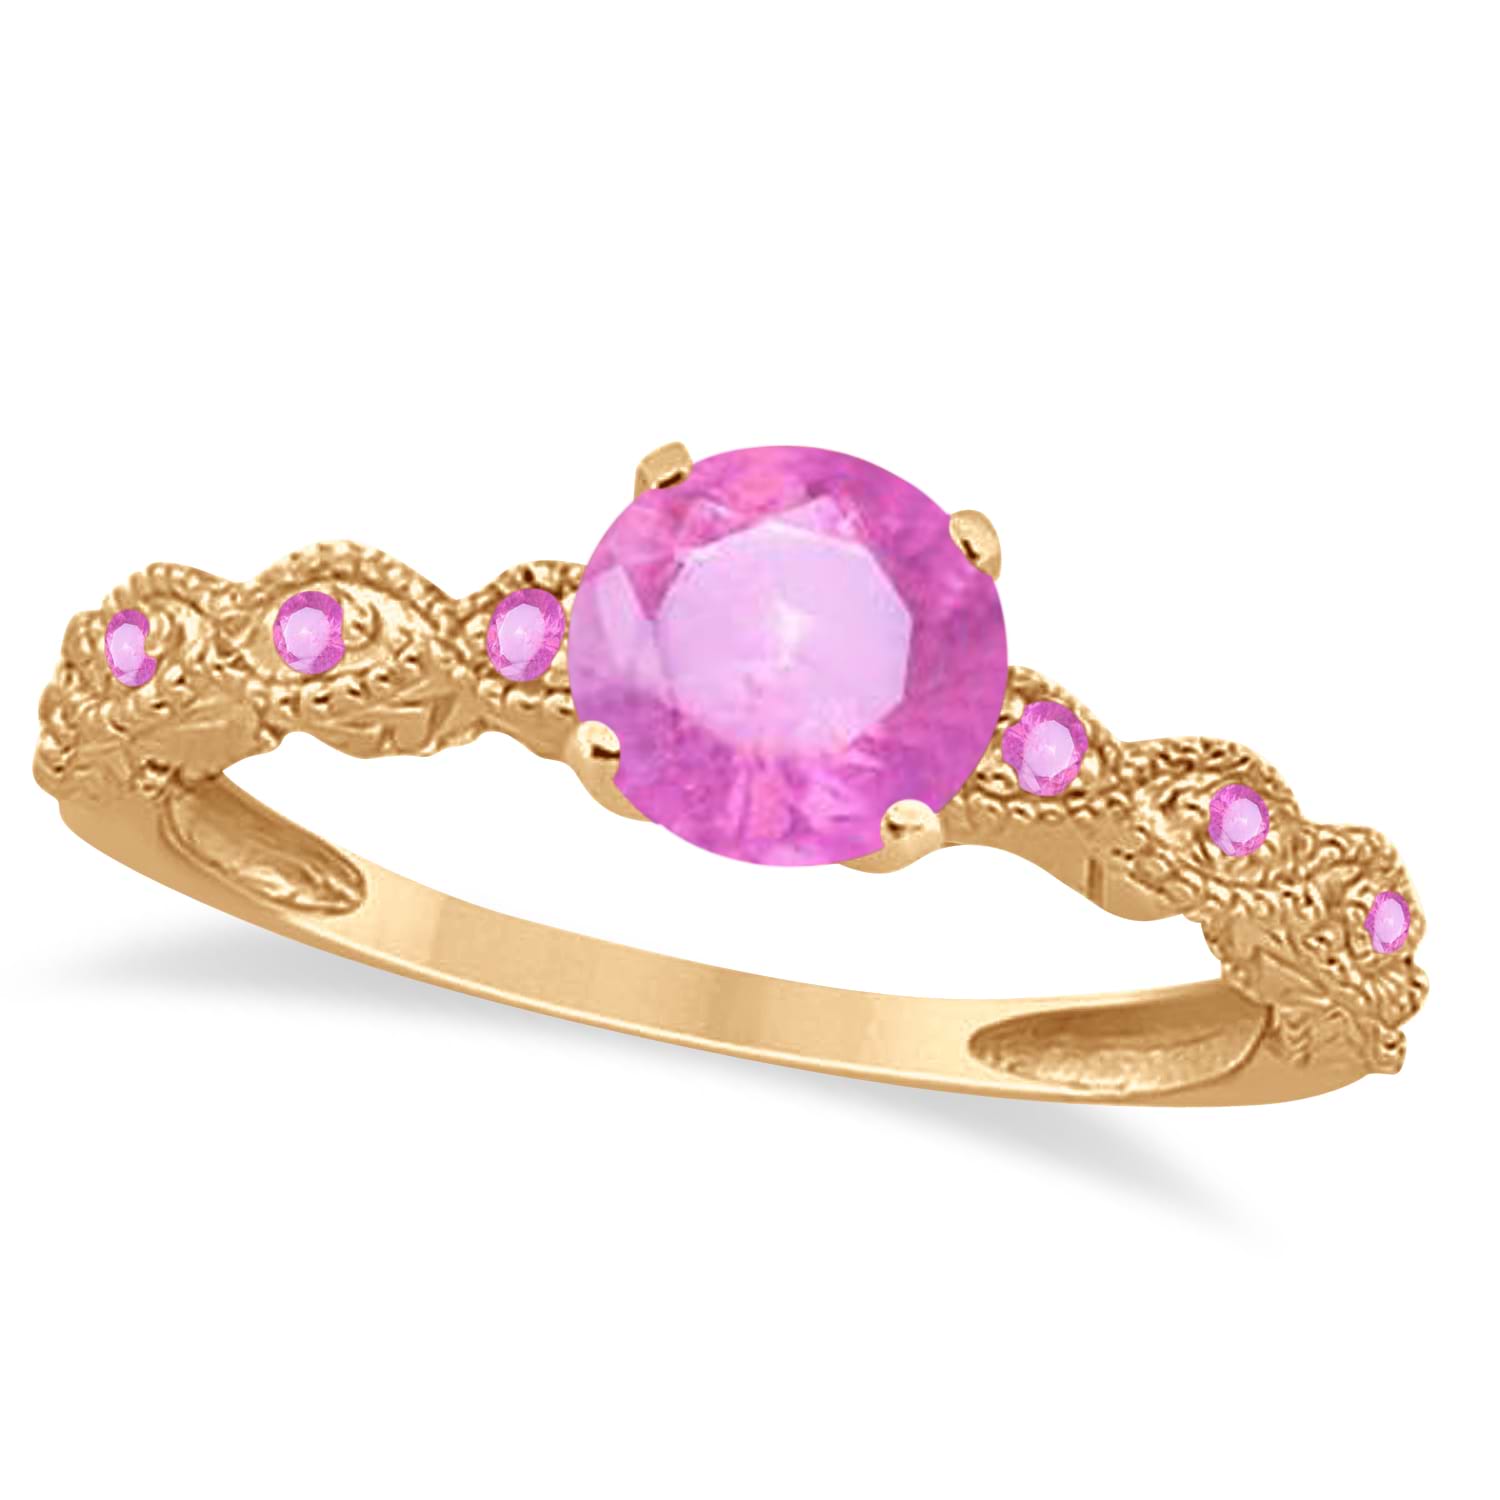 Vintage Style Pink Sapphire Engagement Ring in 18k Rose Gold (1.18ct)